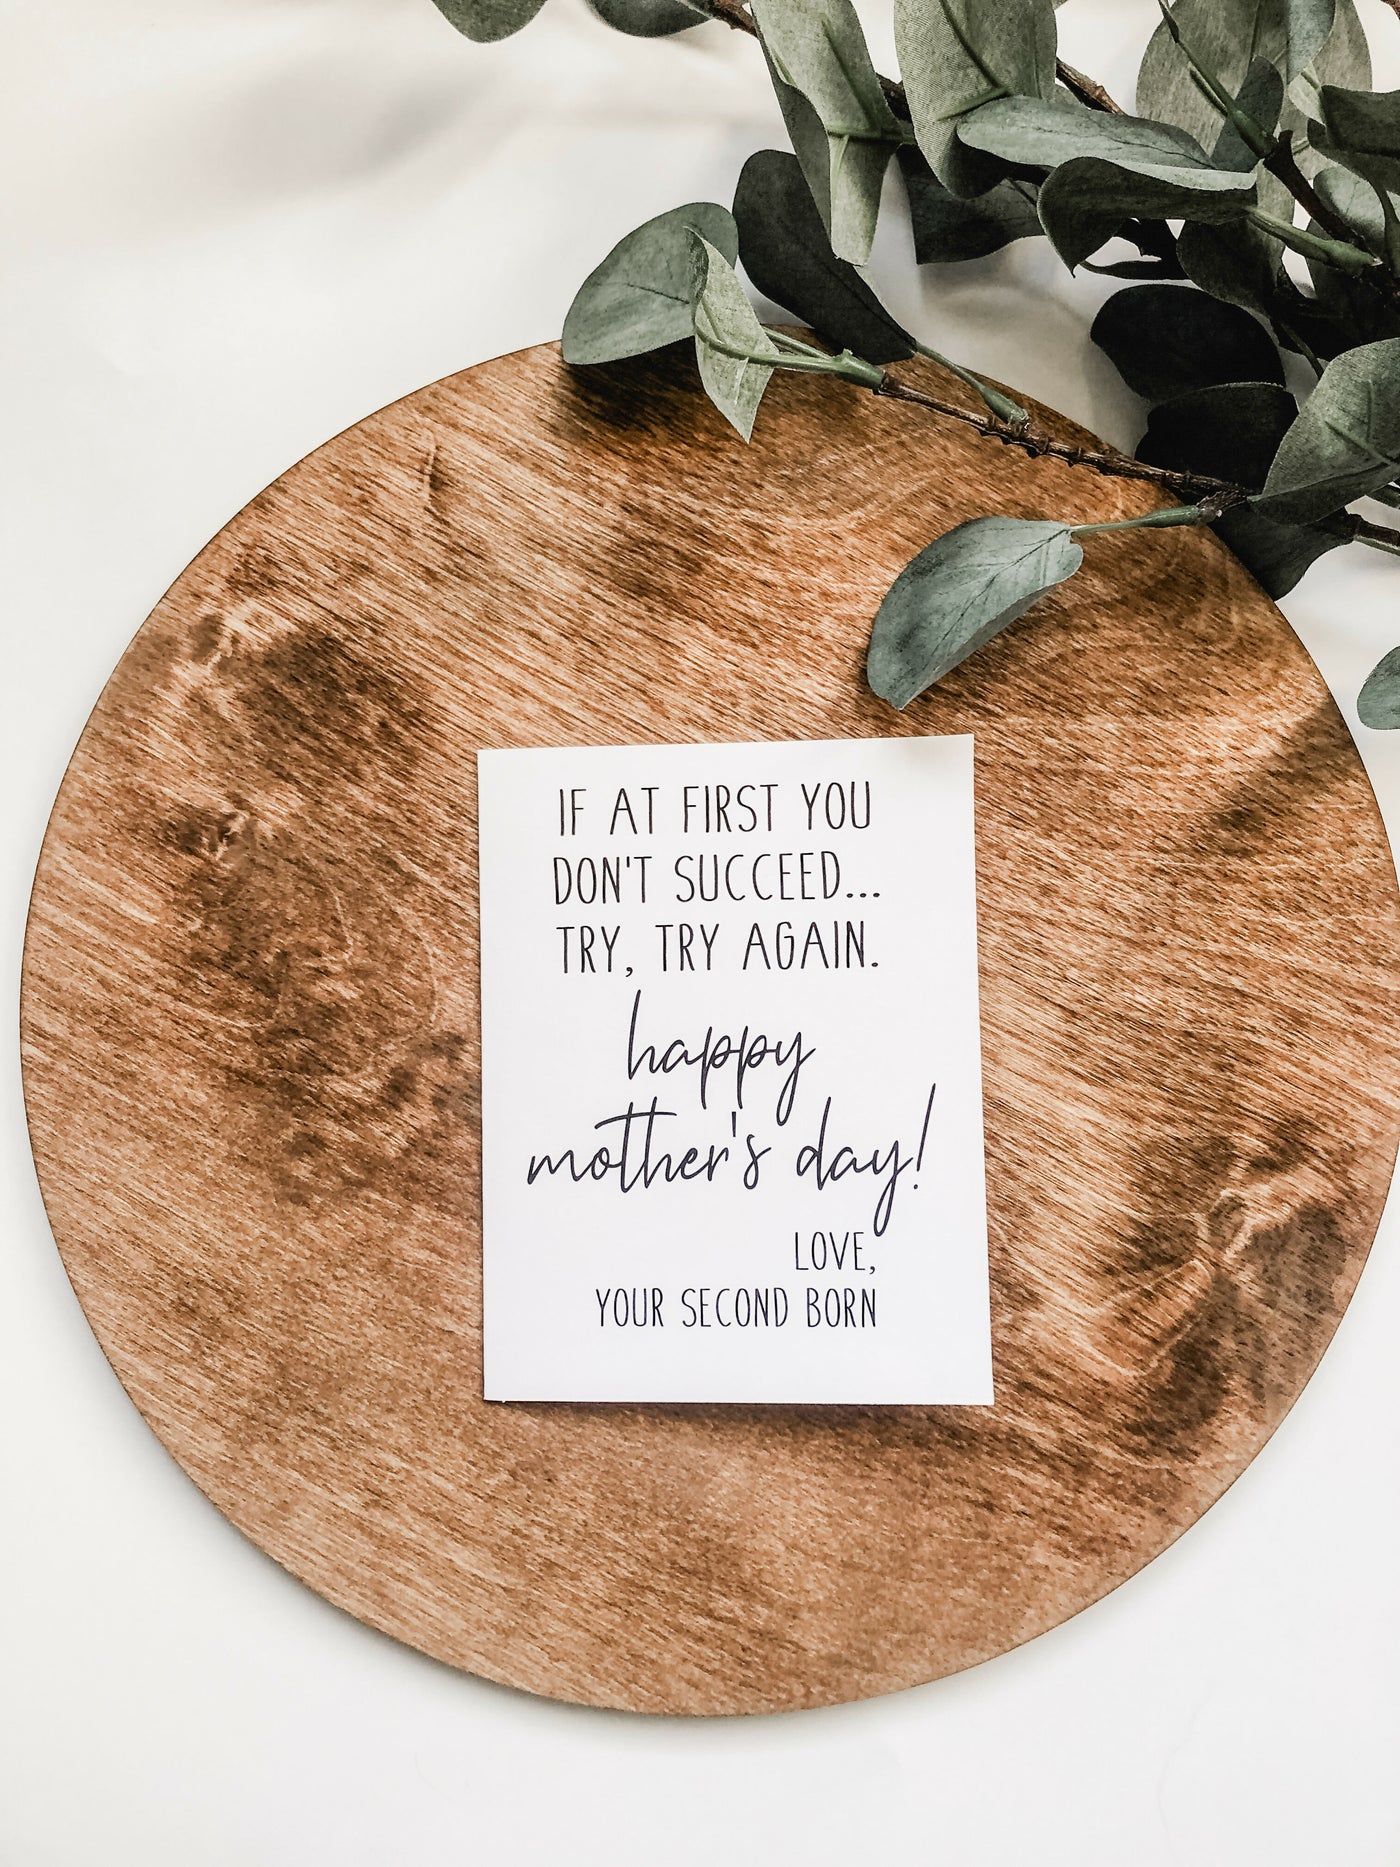 Second Born - Mother's Day Card